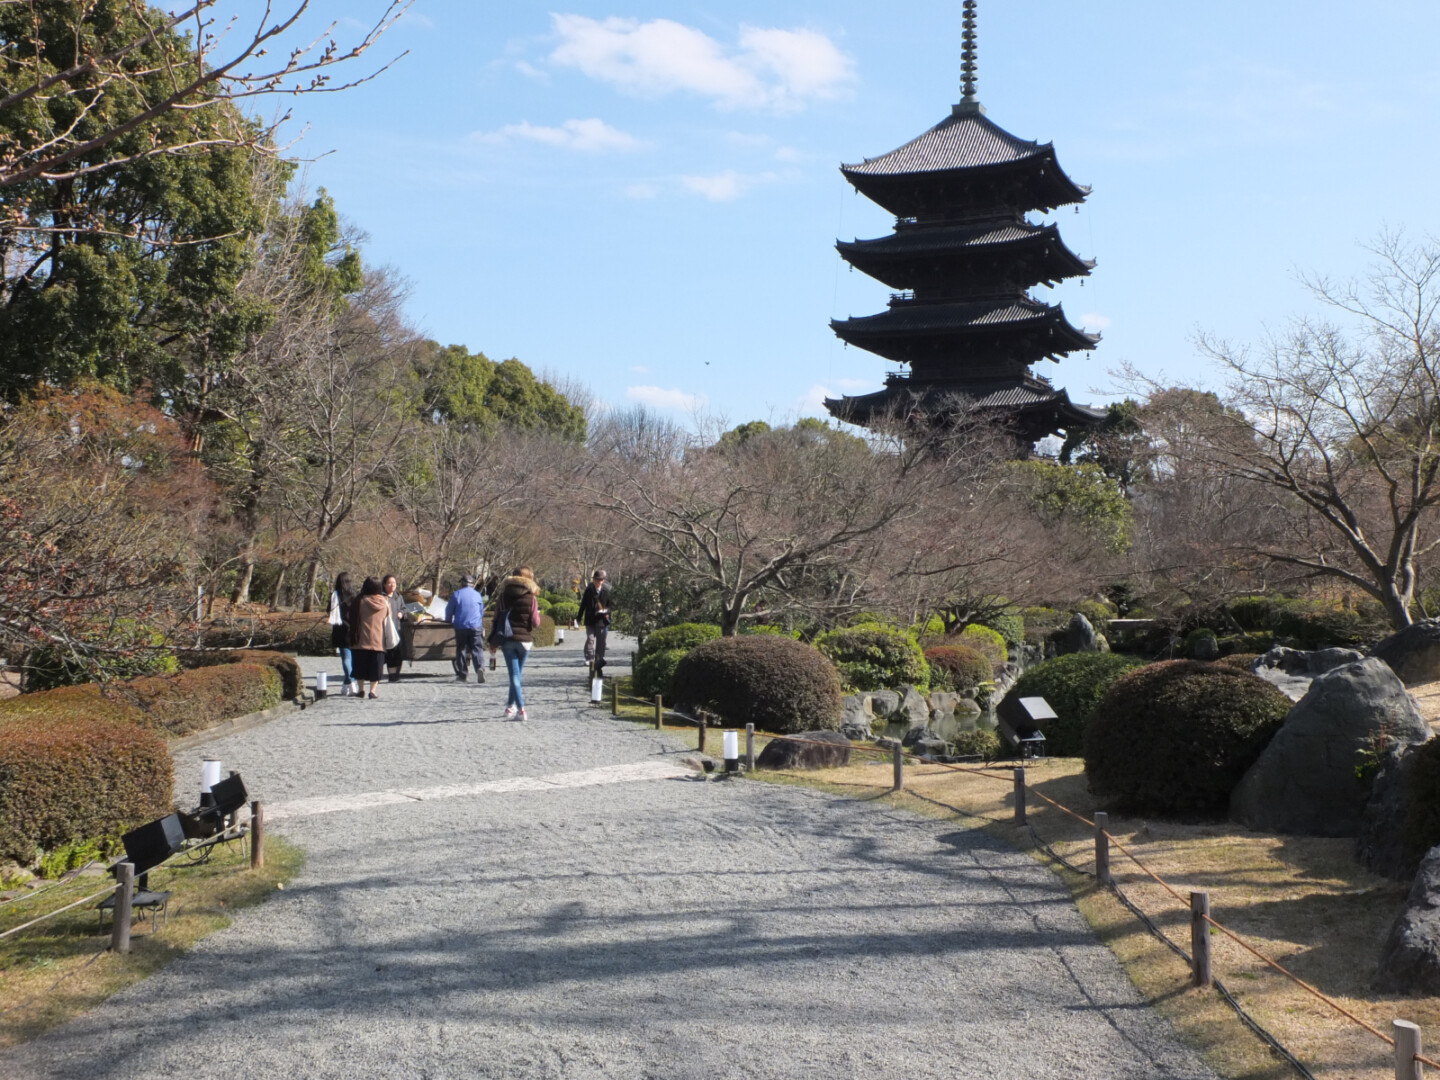 a group of people walking on a path with a pagoda in the background